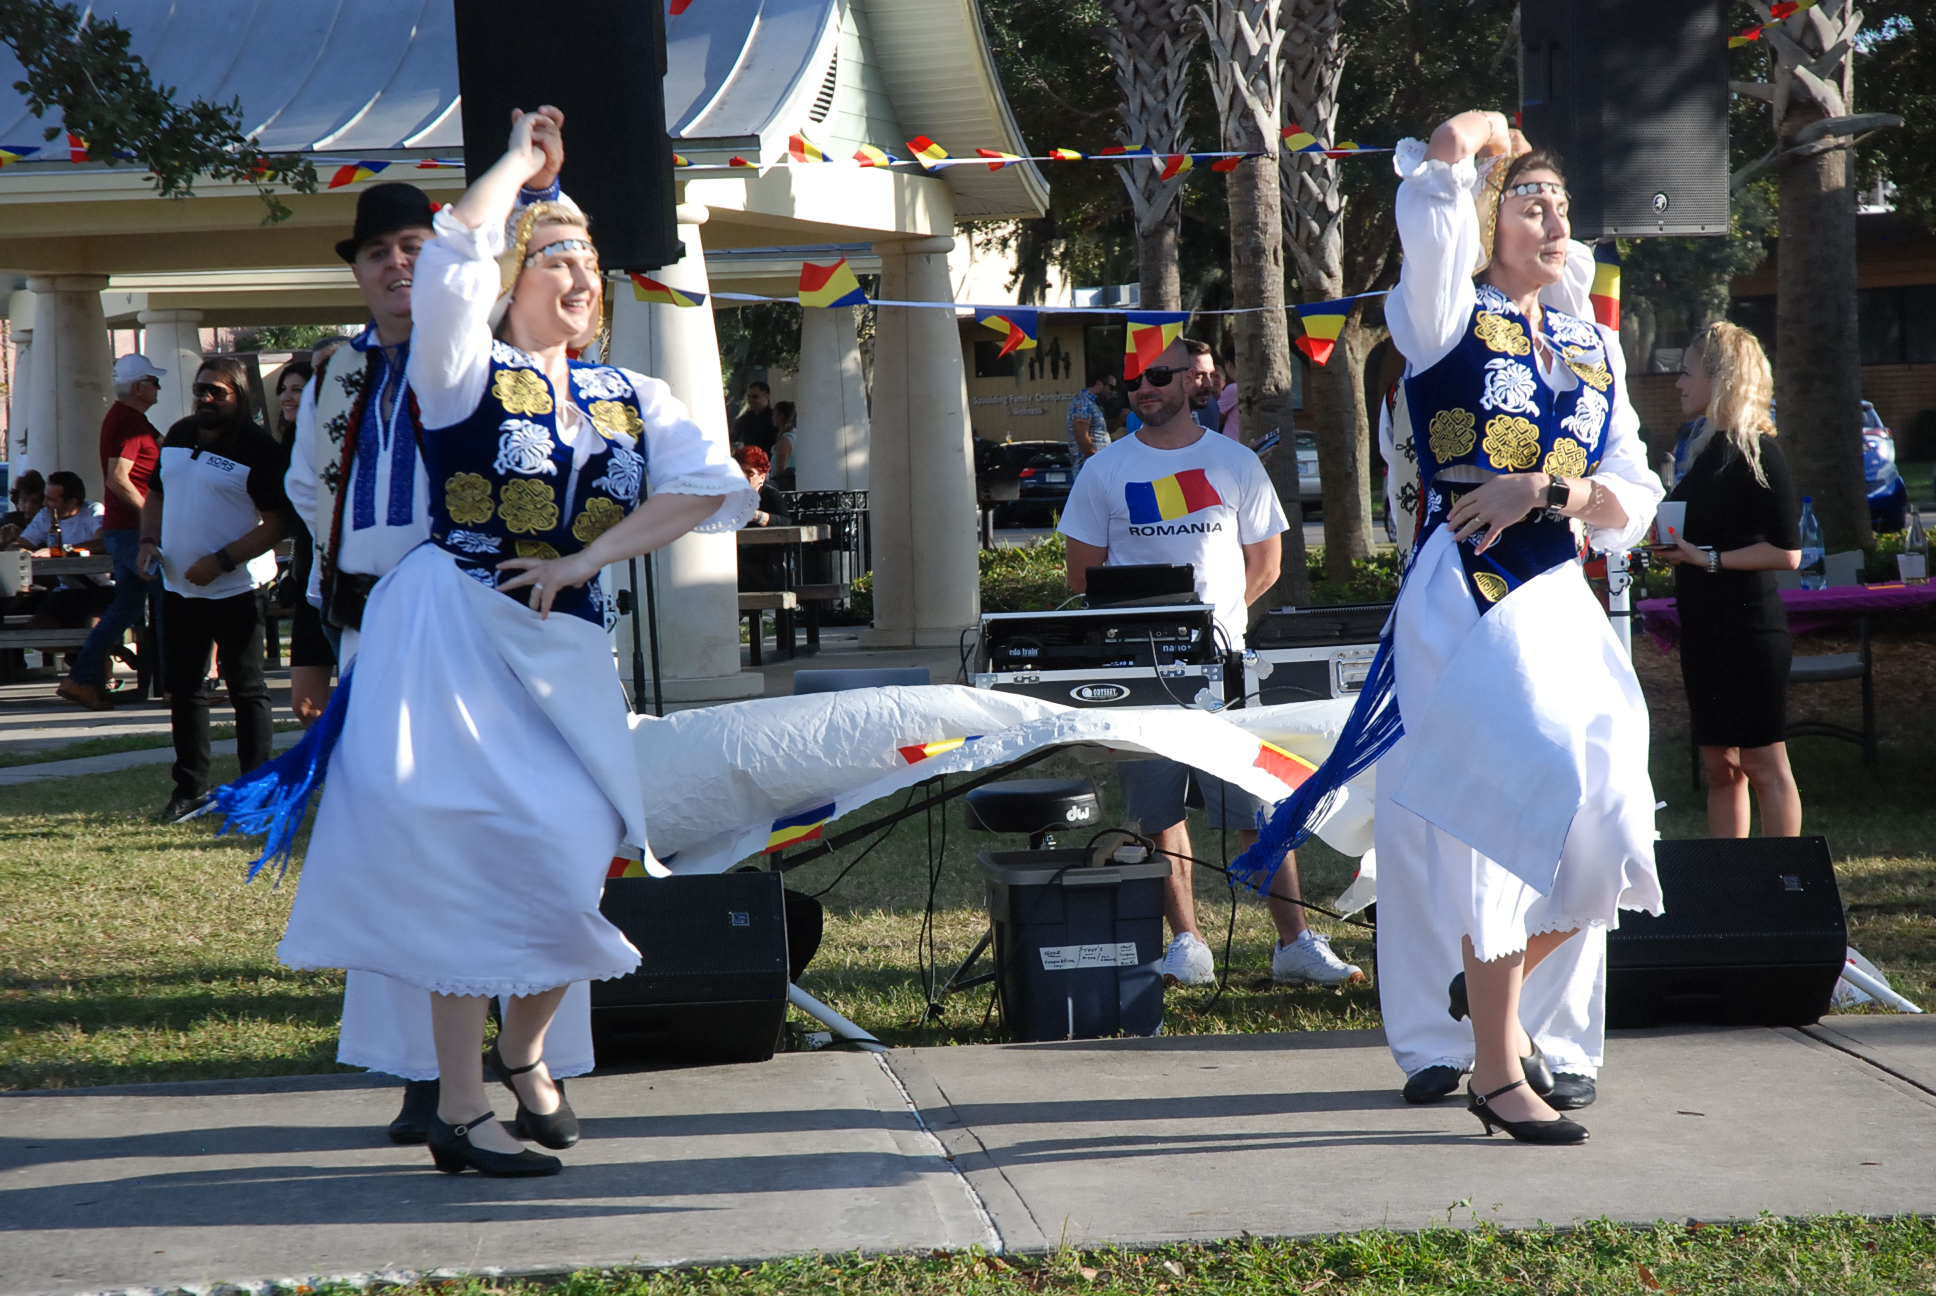 Romanian Festival grows, celebrates culture with song, dancing and food